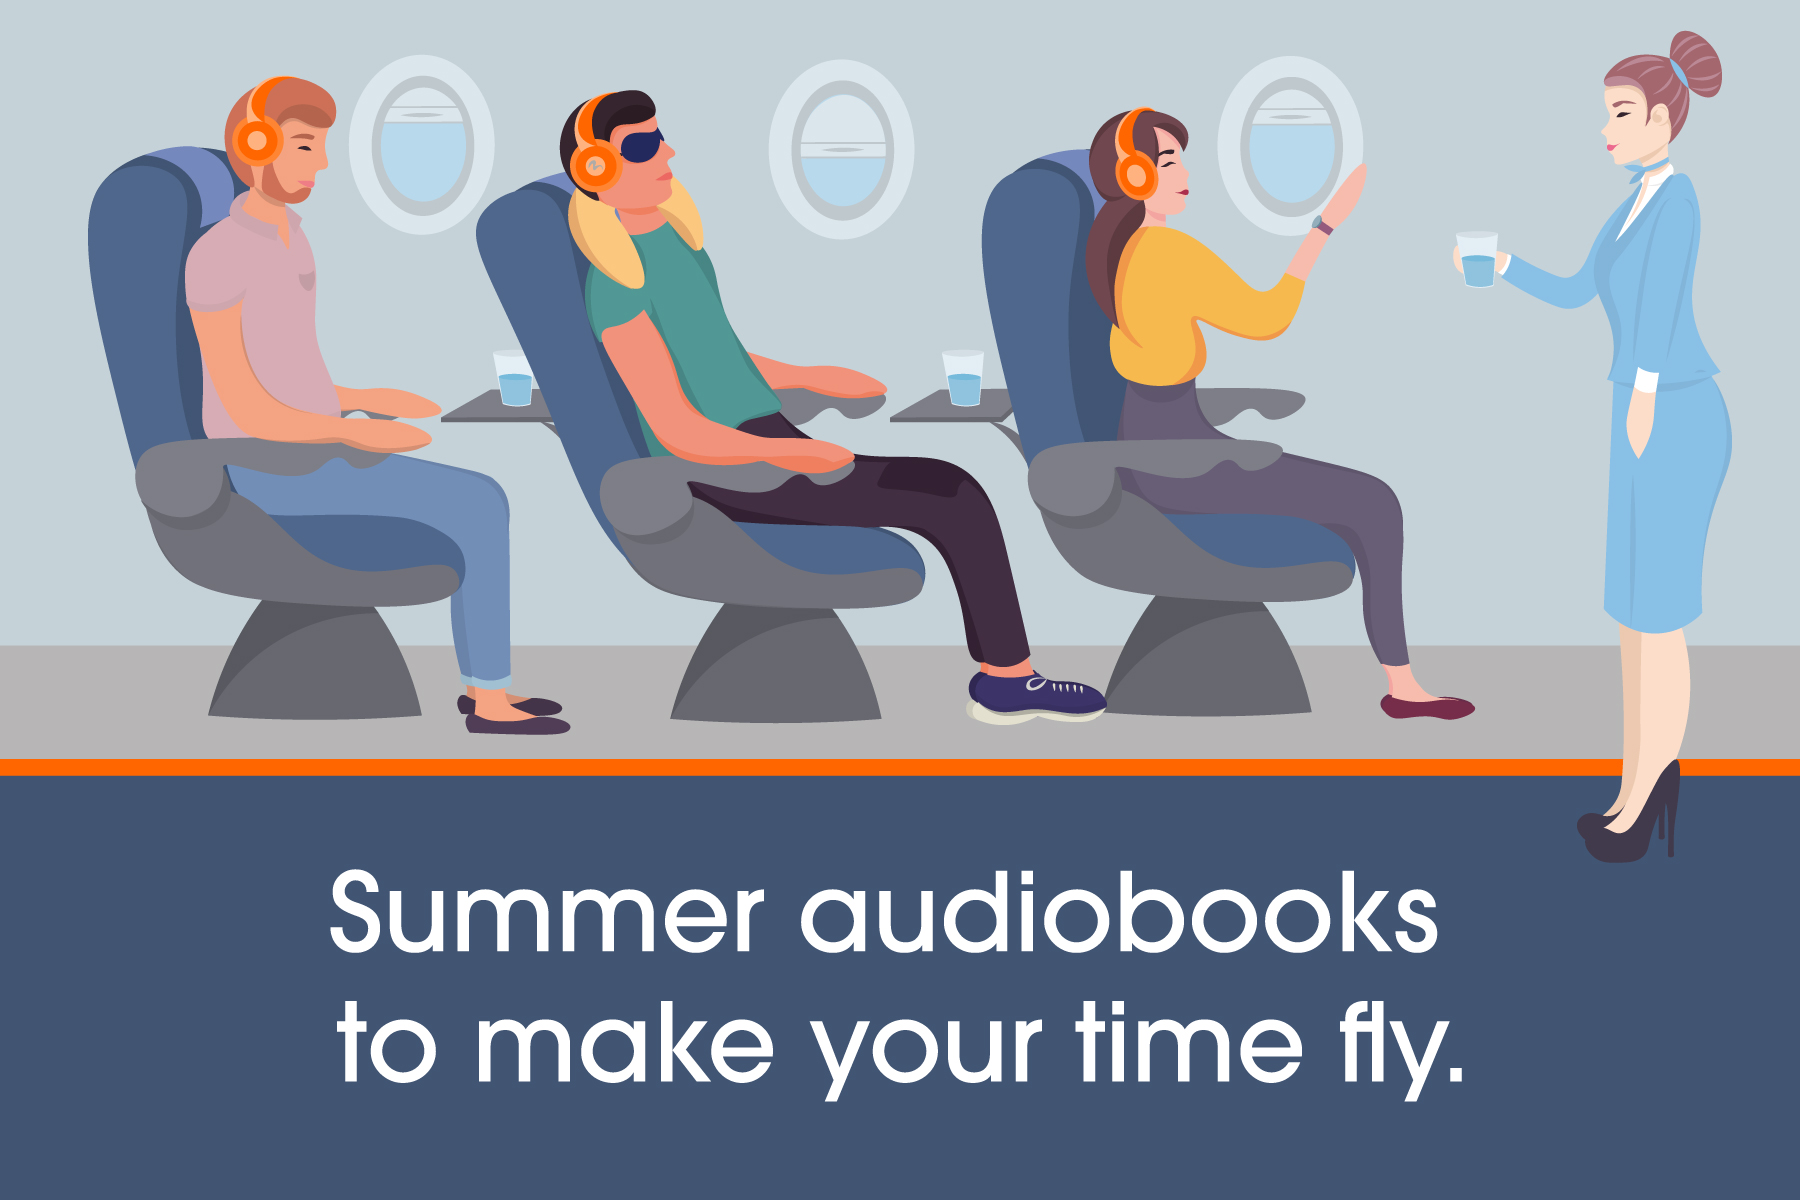 Three passengers are sitting on an airplane and wearing headphones. There is a steward in front of them. The image says "Summer audiobooks to make your time fly". 